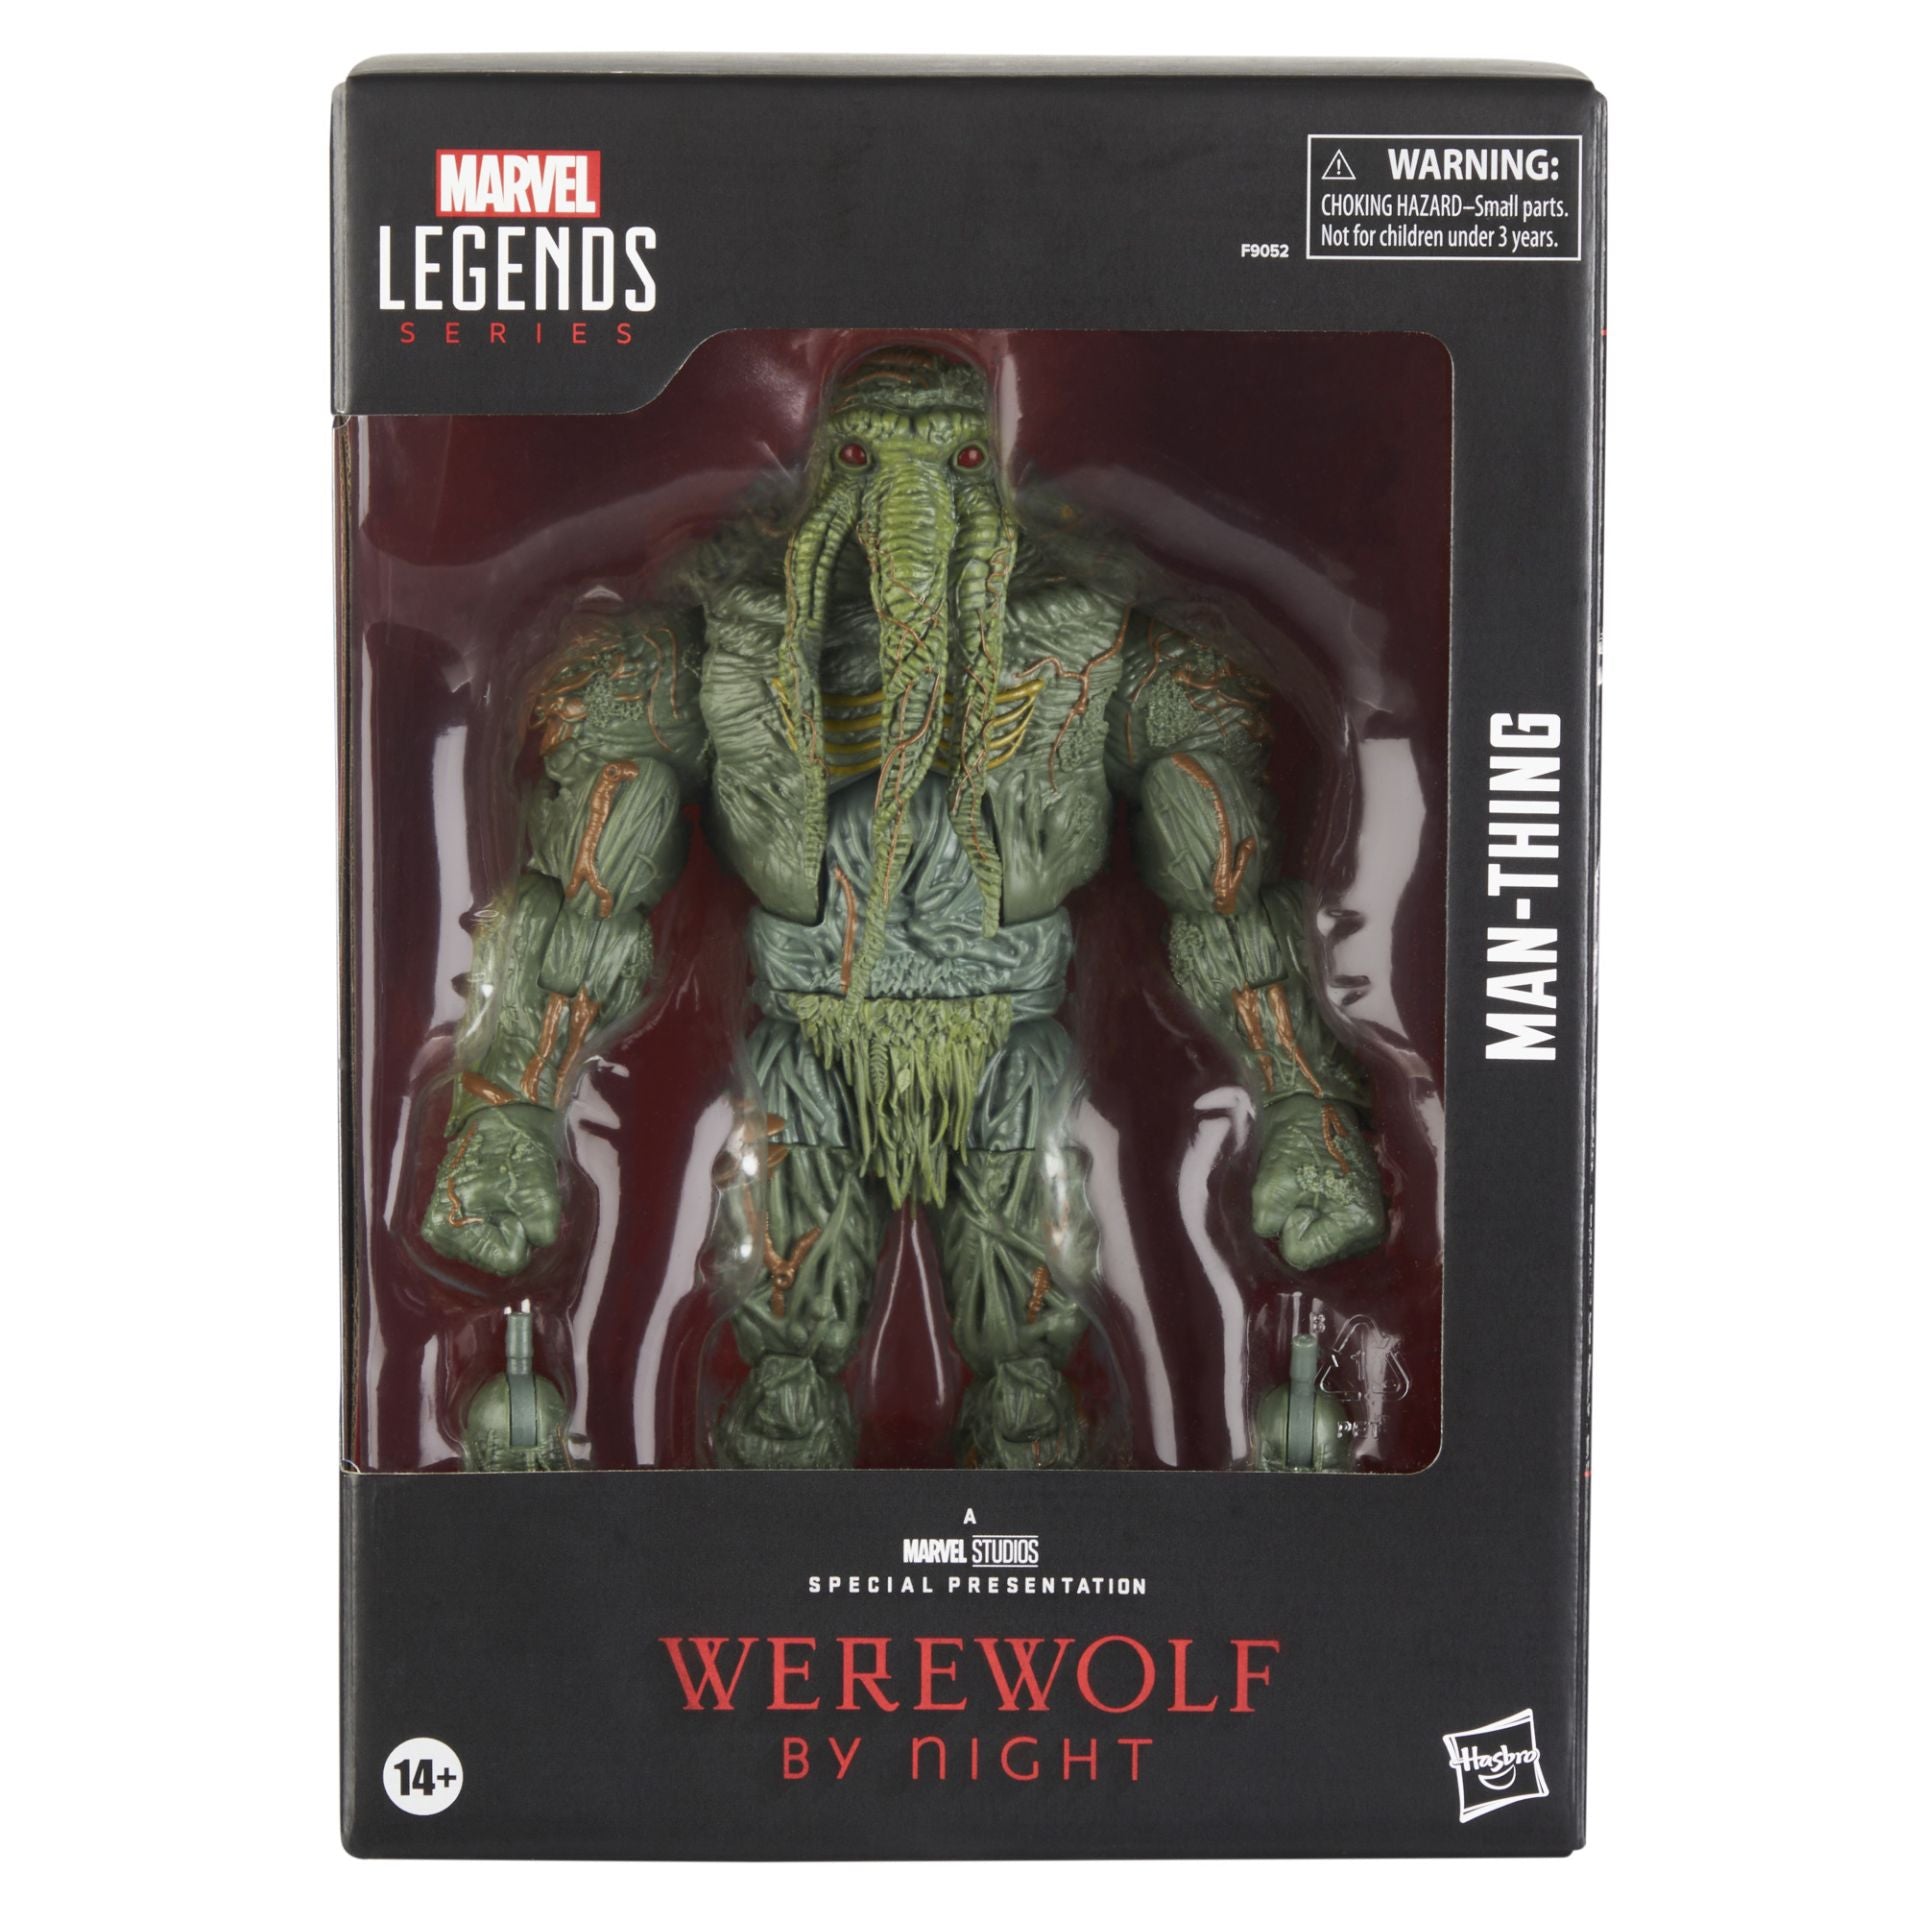 Marvel Legends Legacy Collection 6" Man-Thing (Werewolf by Night)